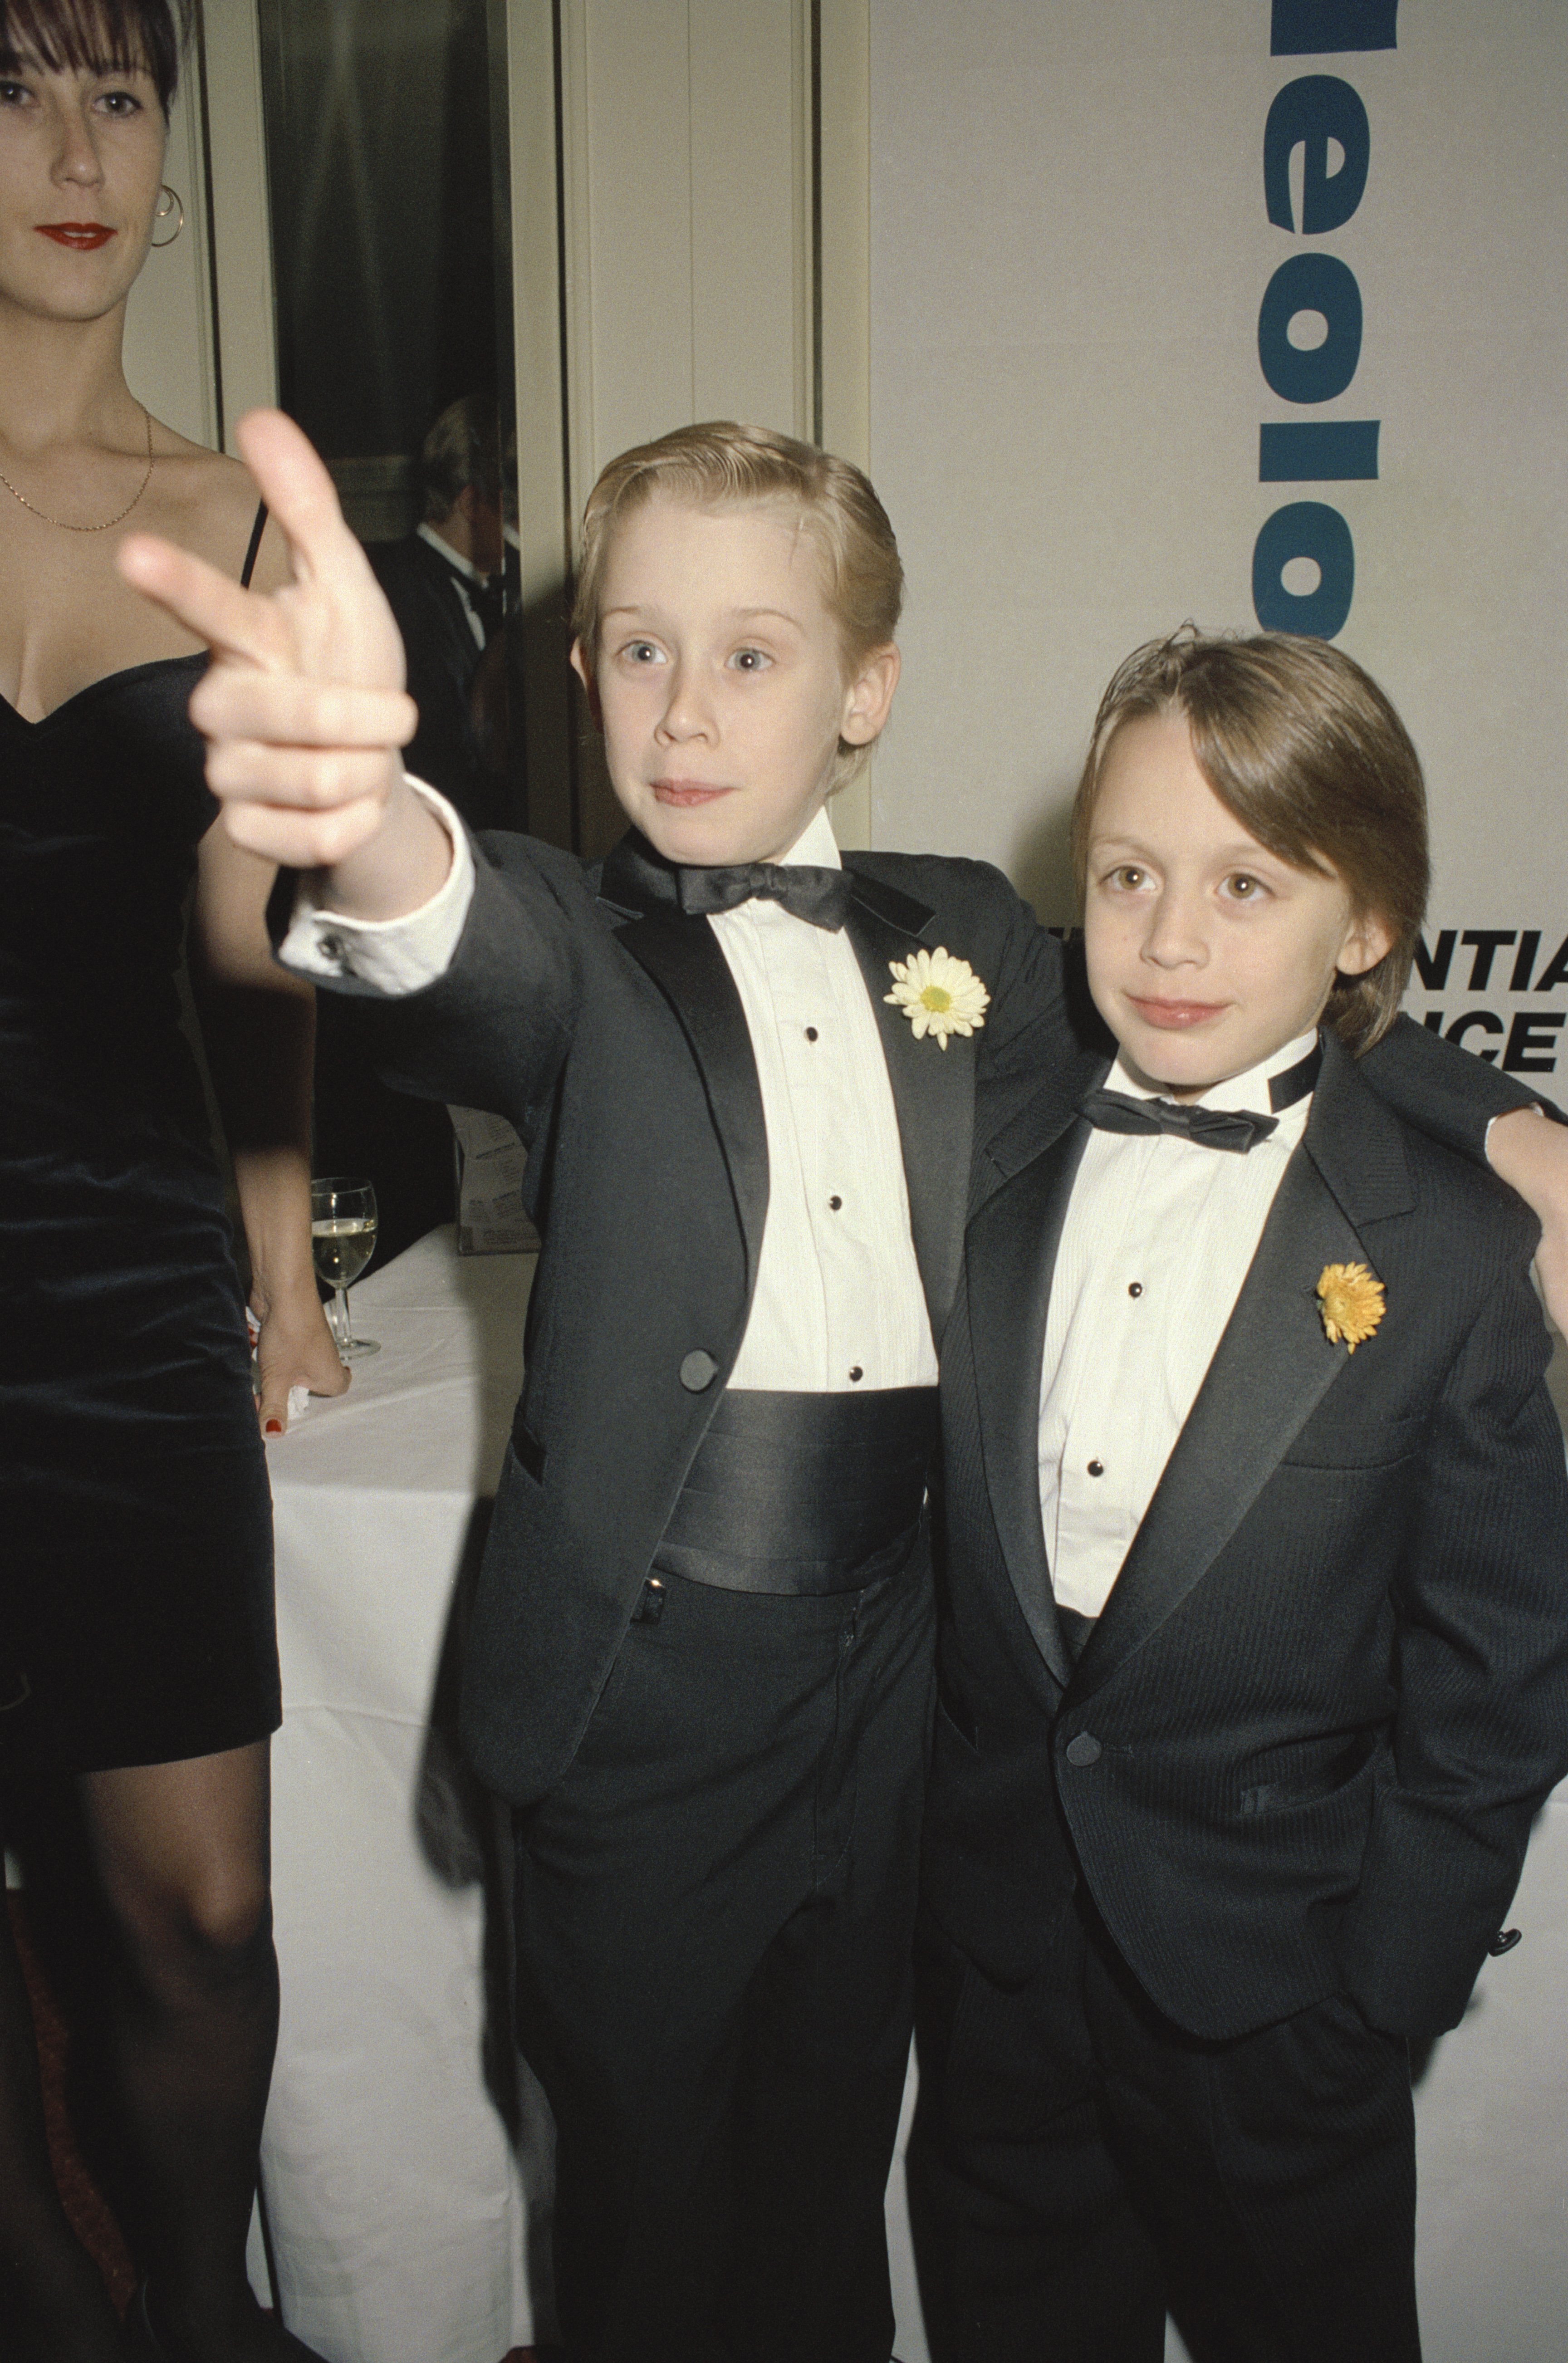  Macaulay Culkin (L) is photographed with his younger brother, Kieran Culkin, circa 1990 | Source: Getty Images